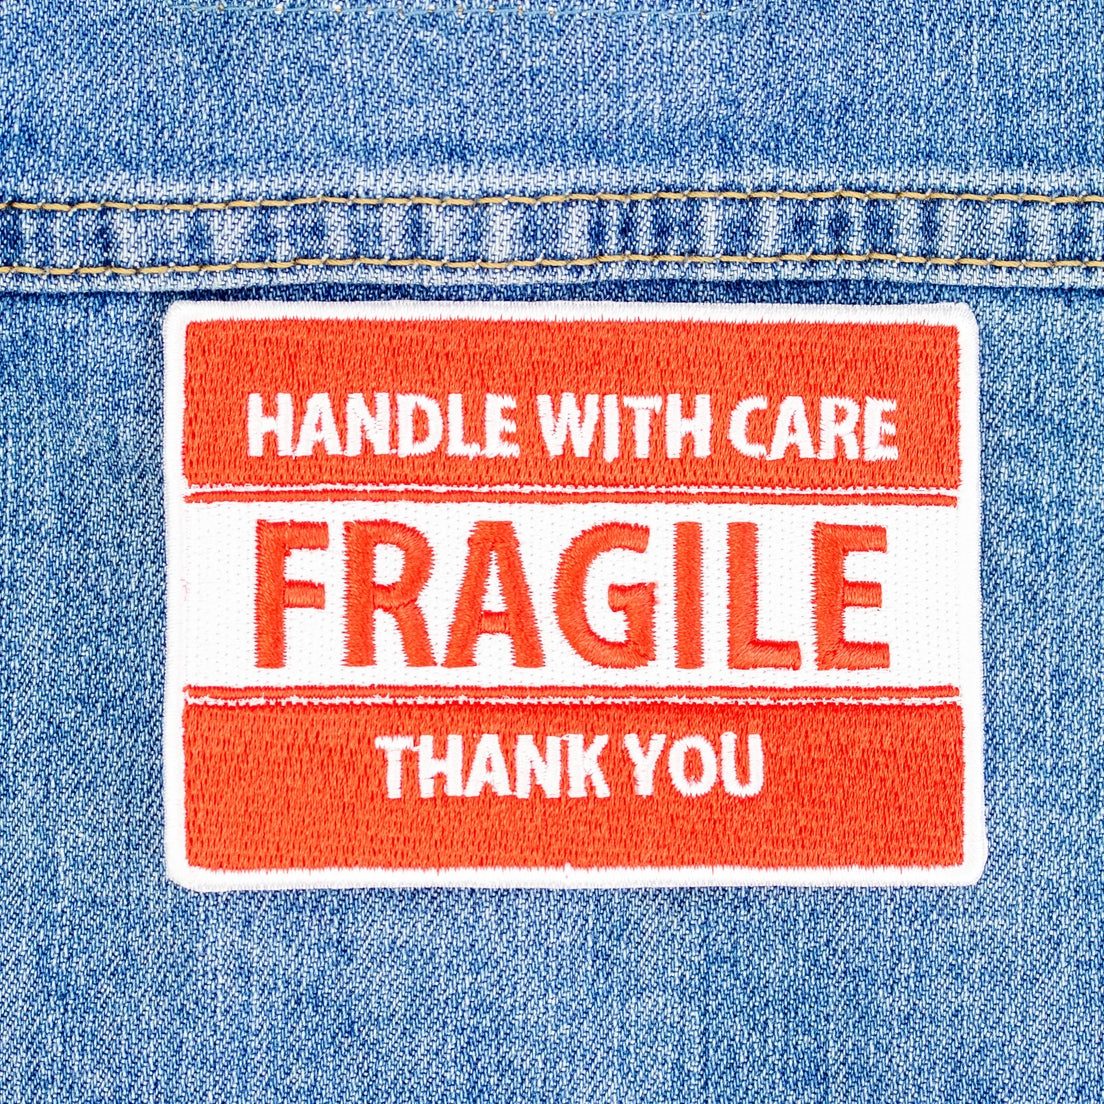 The Fragile Patch pictured against a denim background 